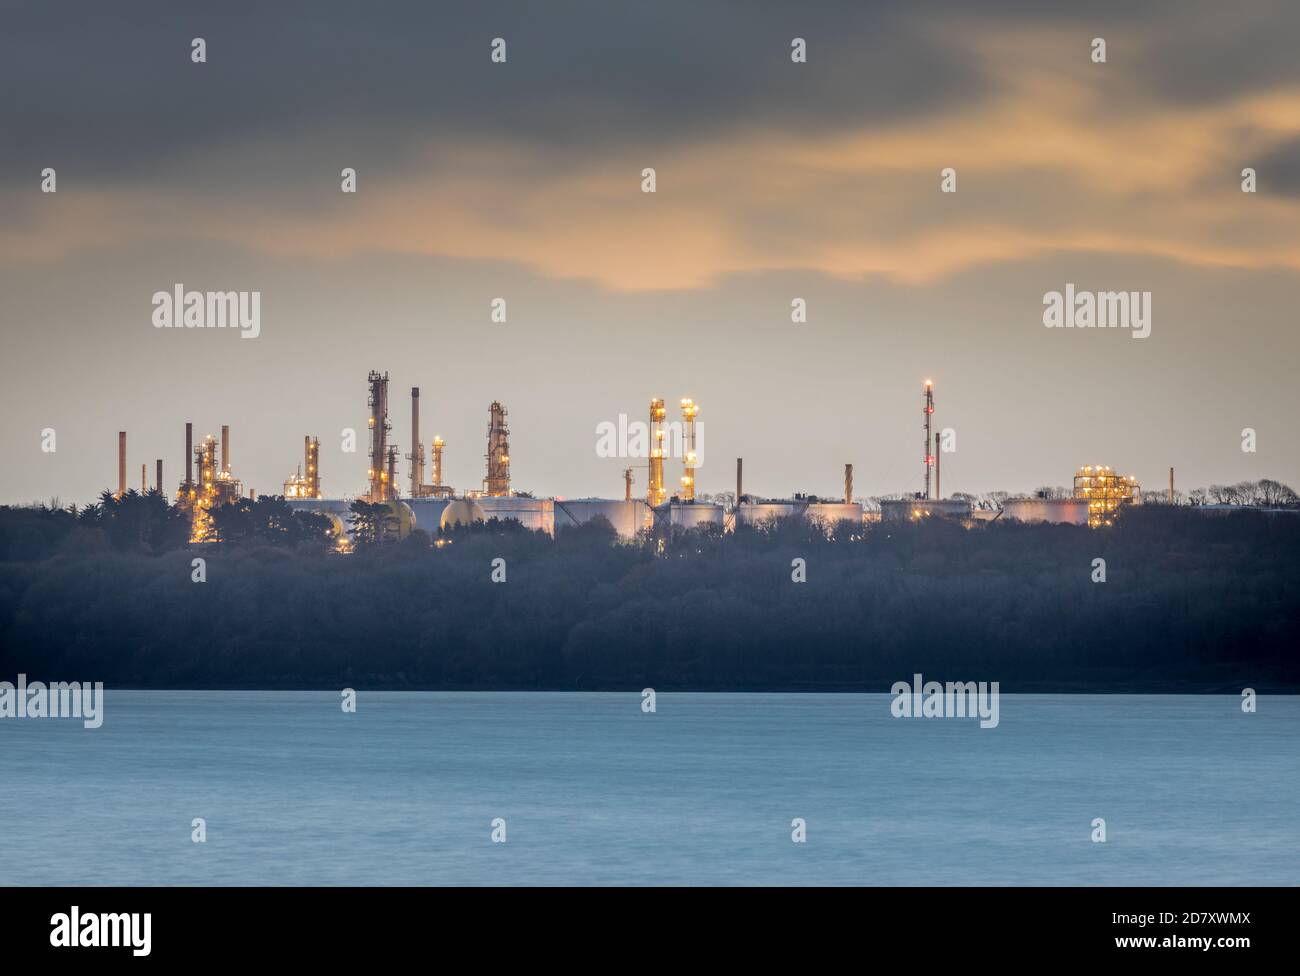 Whitegate, Cork, Ireland. 26th October, 2020. A view of the distillation towers and storage tanks before dawn at the Irving Oil Refinery in Whitegate, Co. Cork, Ireland. - Credit; David Creedon / Alamy Live News Stock Photo